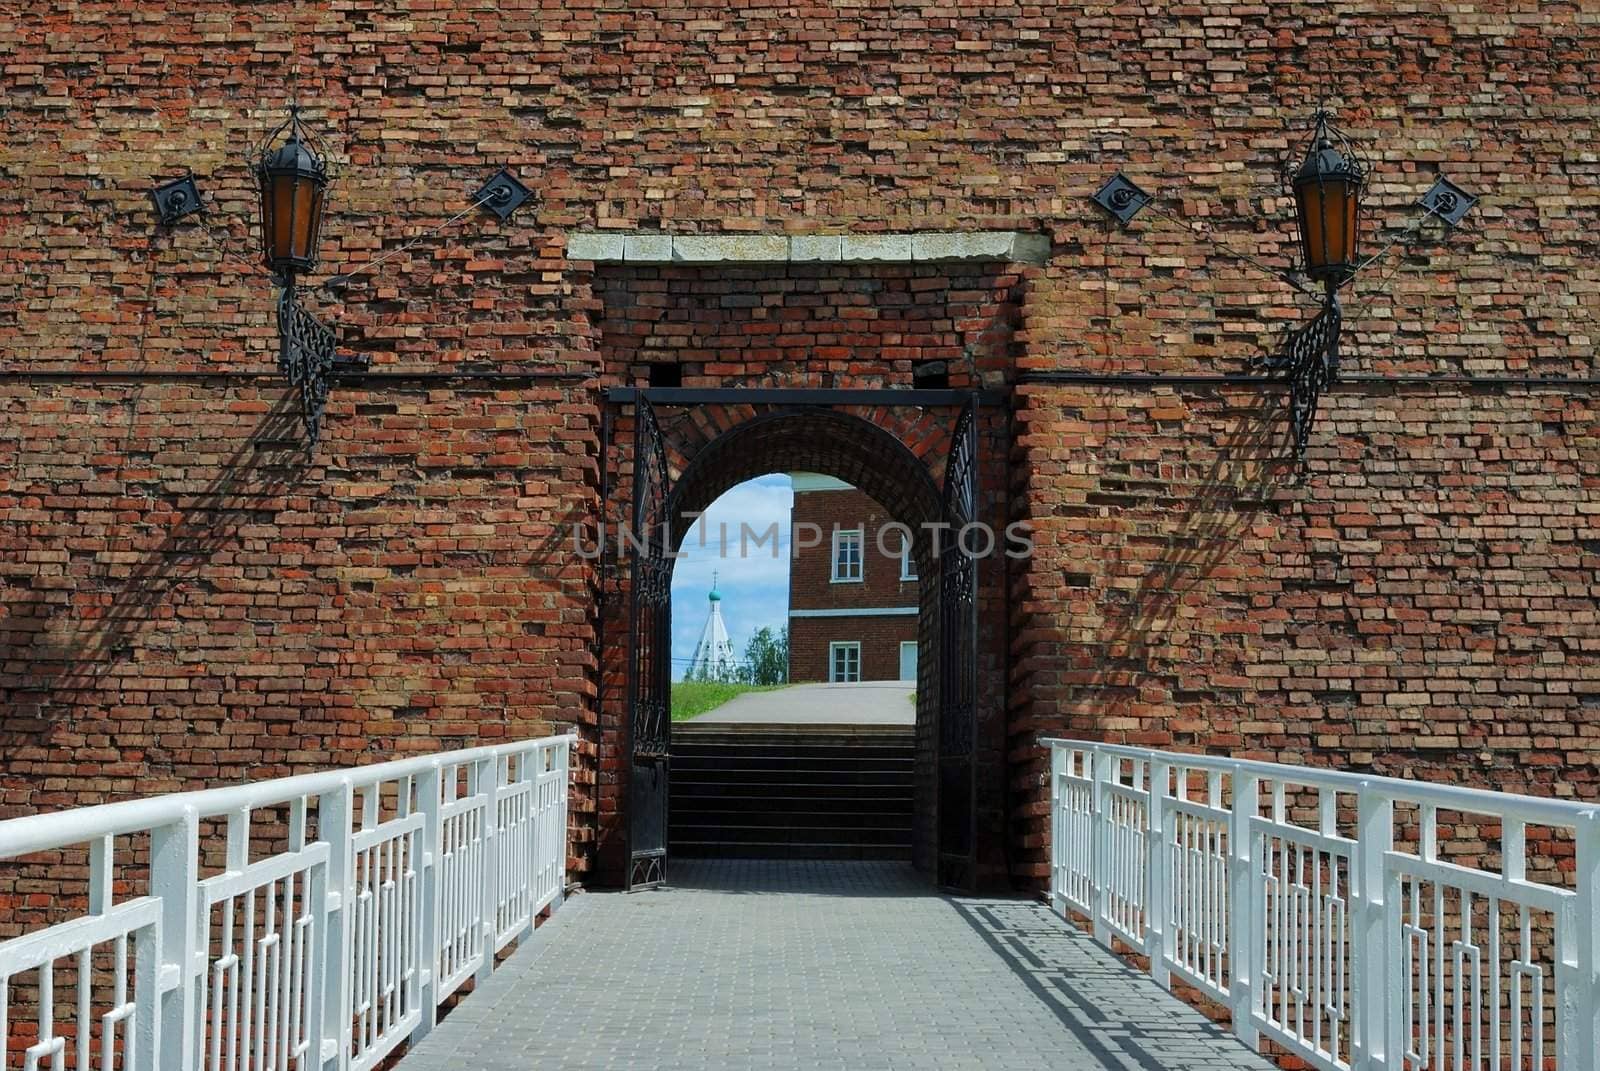 Entrance to old fortress in Kolomna town near Moscow